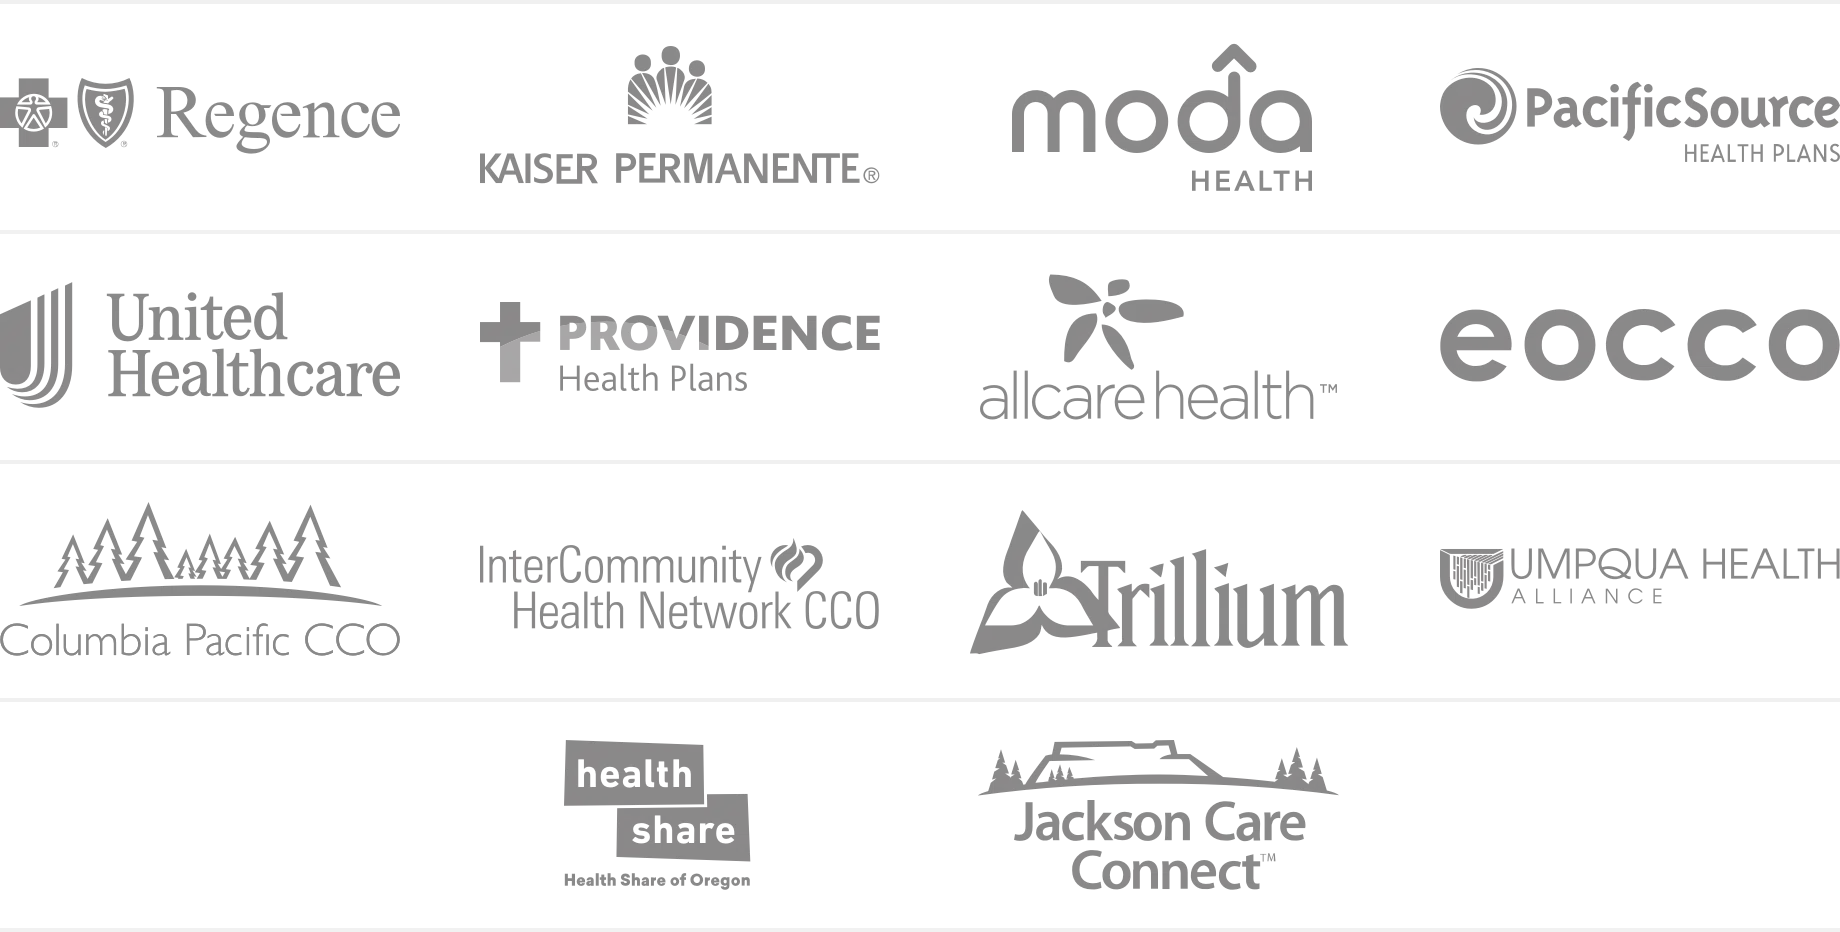 Accepted Insurance Companies